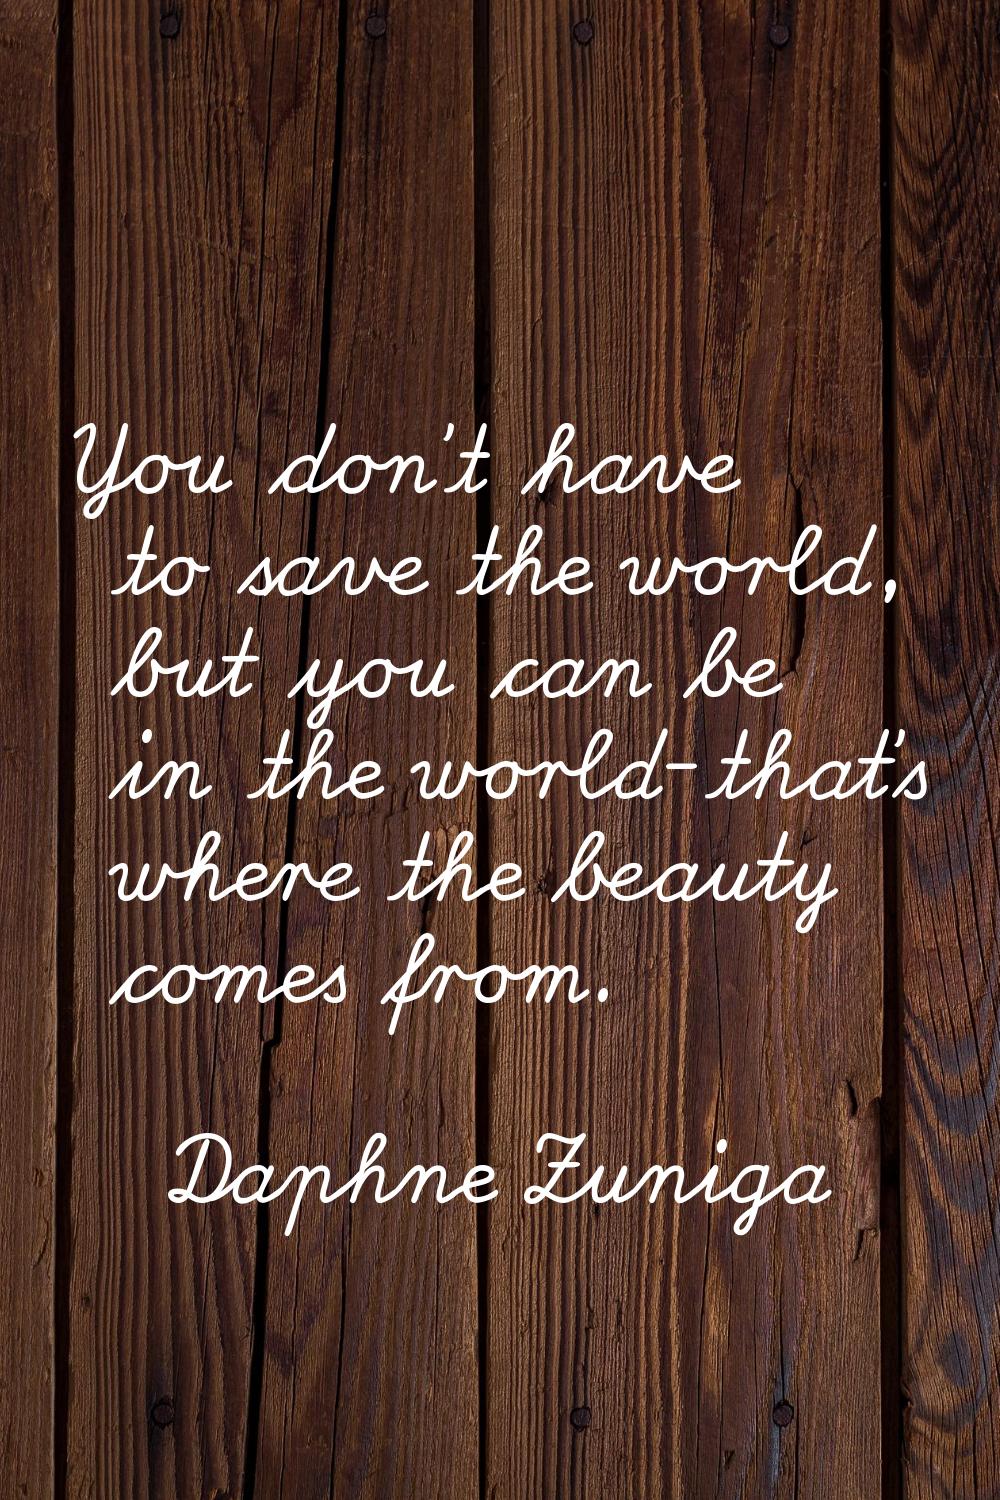 You don't have to save the world, but you can be in the world-that's where the beauty comes from.